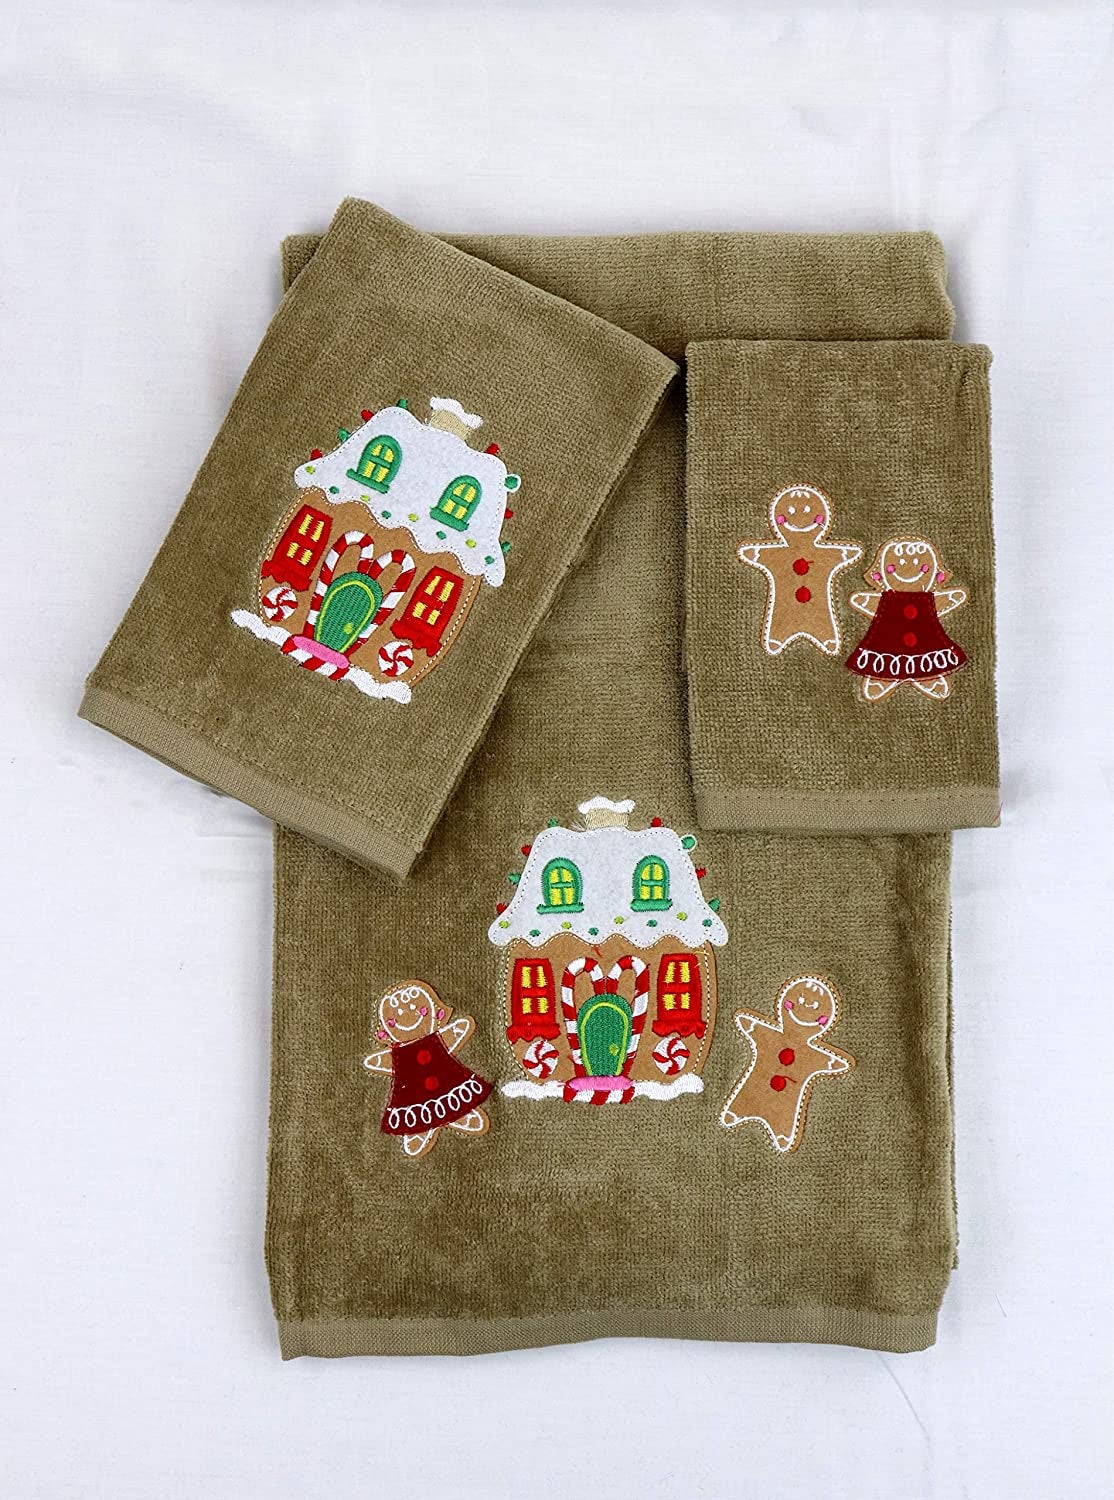 bath towel, face towel, and hand towel with gingerbread folks and houses embroidered on each 